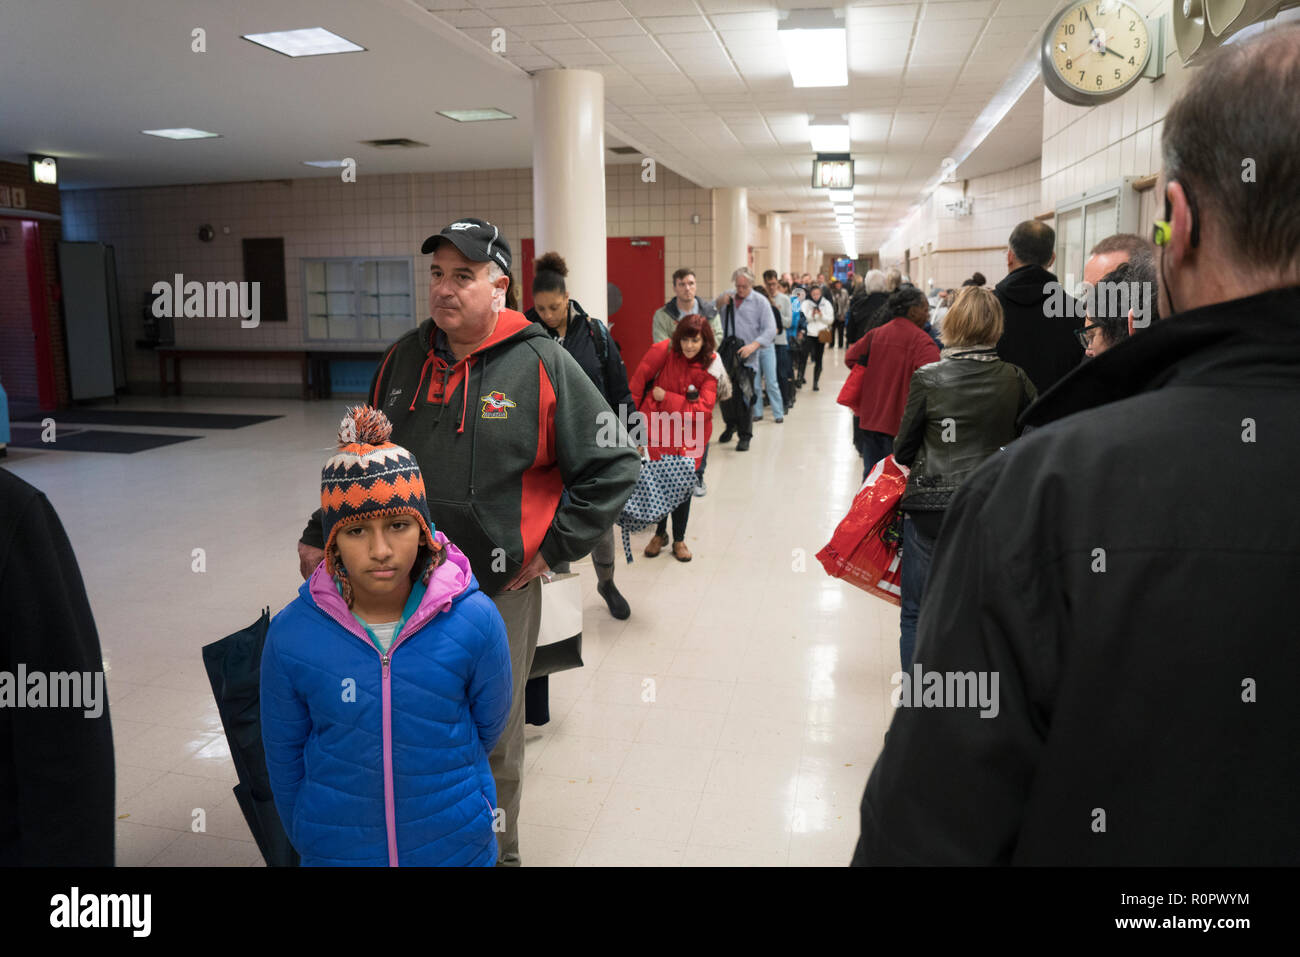 New York, NY, 6th Nov., 2018 — People waited in line to vote at a public school in Tribeca on Nov. 6, 2018. Credit: Terese Loeb Kreuzer/Alamy News Stock Photo